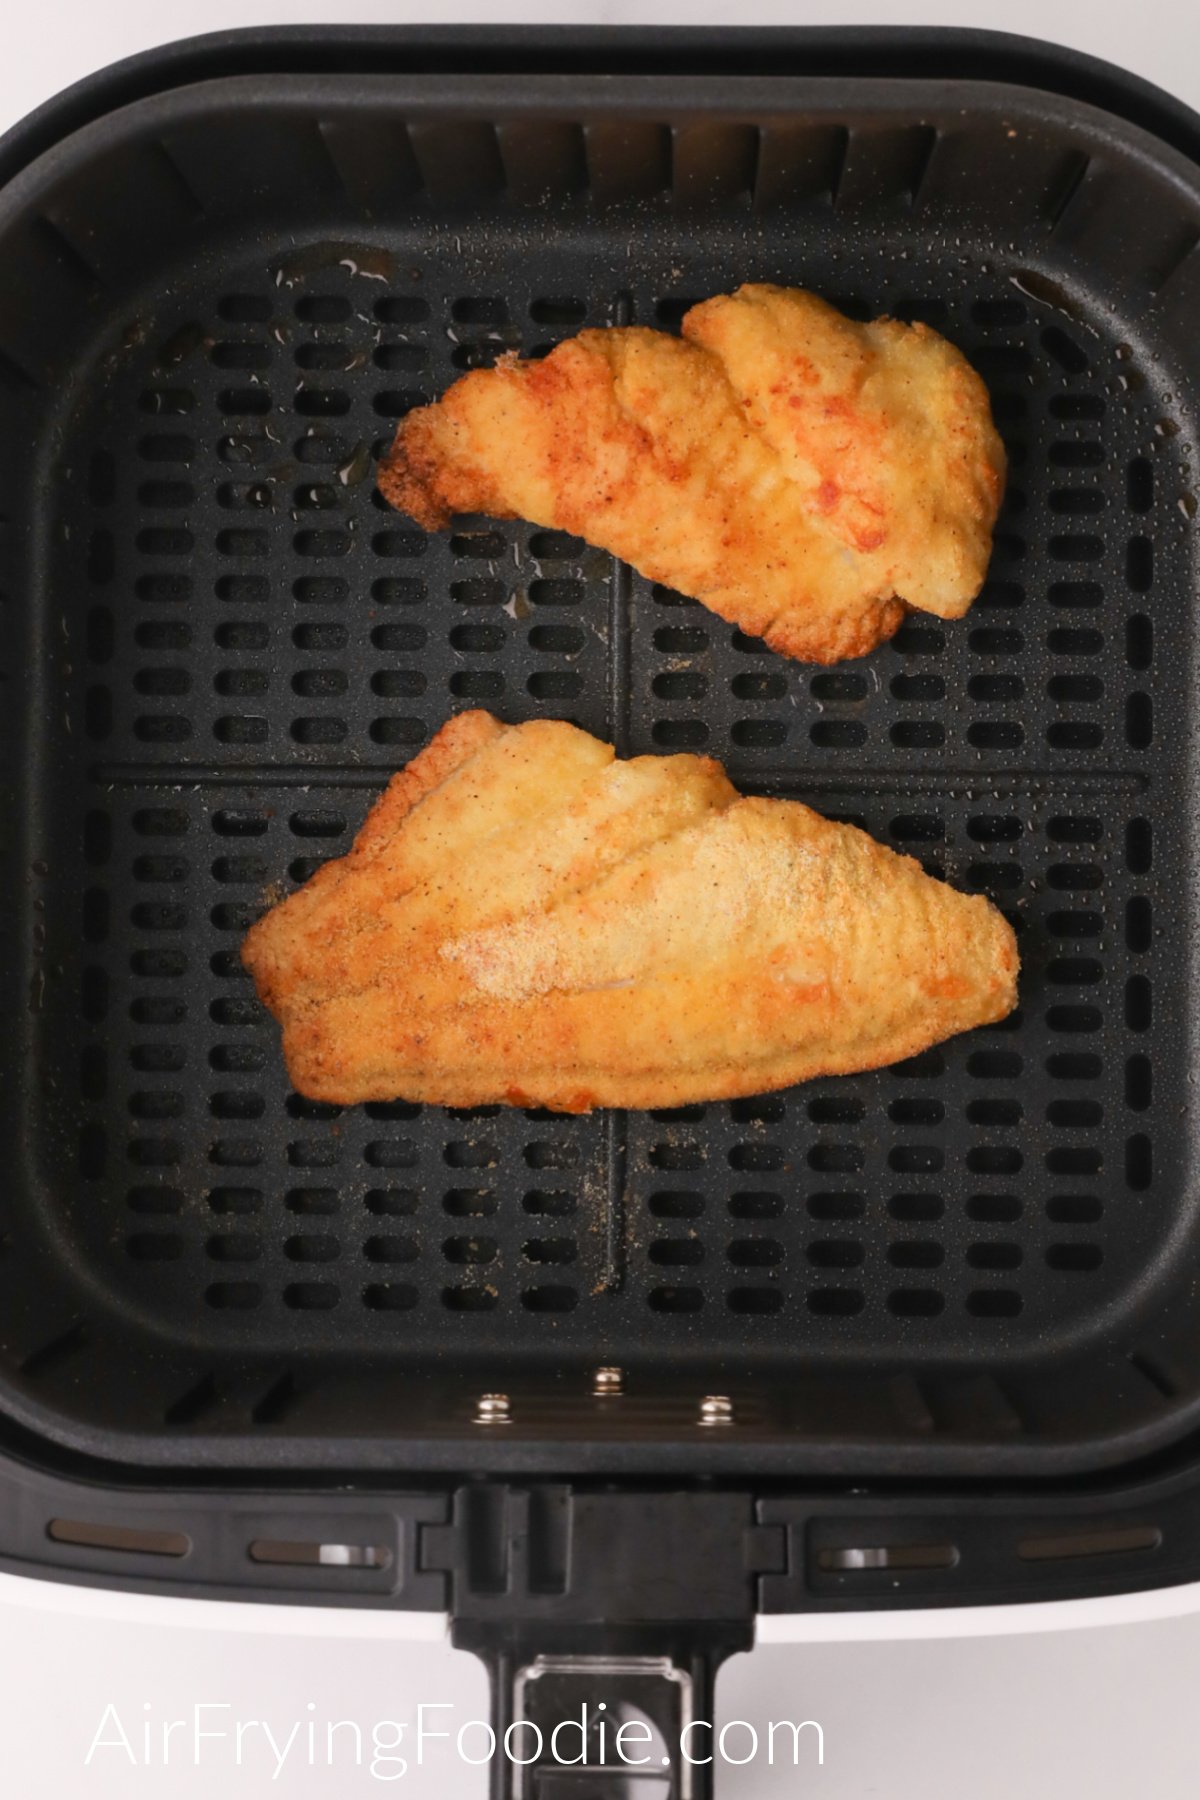 Air fried catfish in the basket of the air fryer, ready to serve.